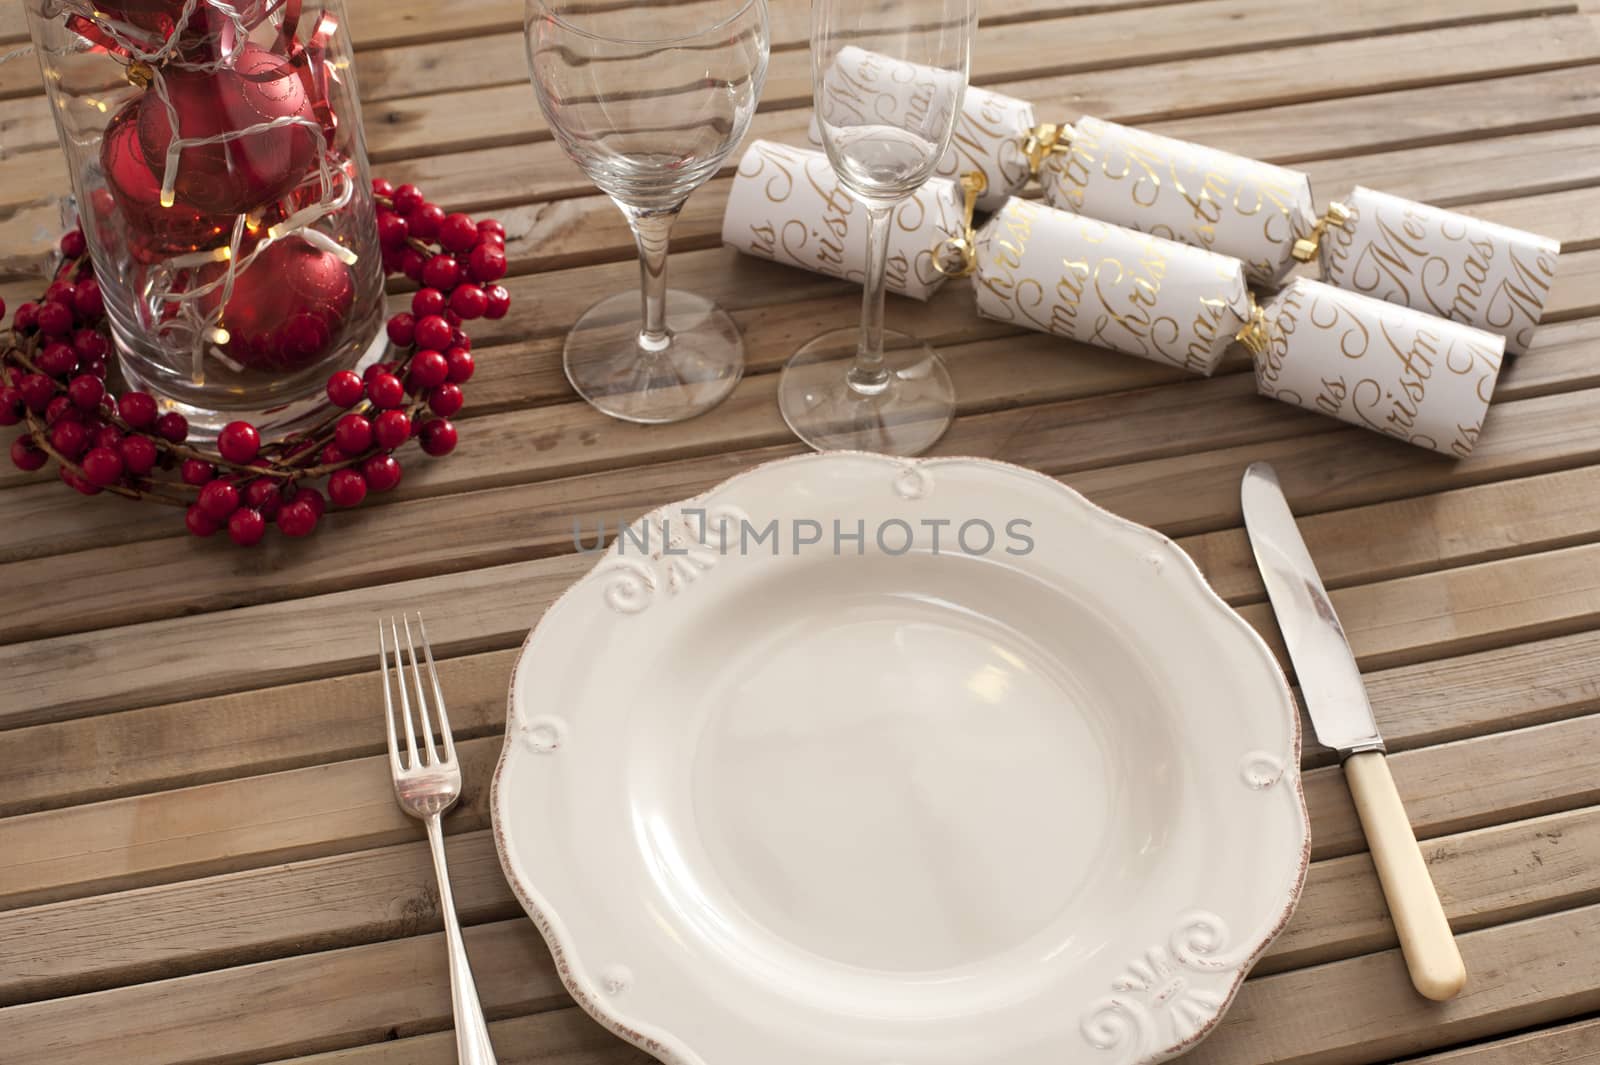 Overhead view of place setting with classic plate and christmas accents